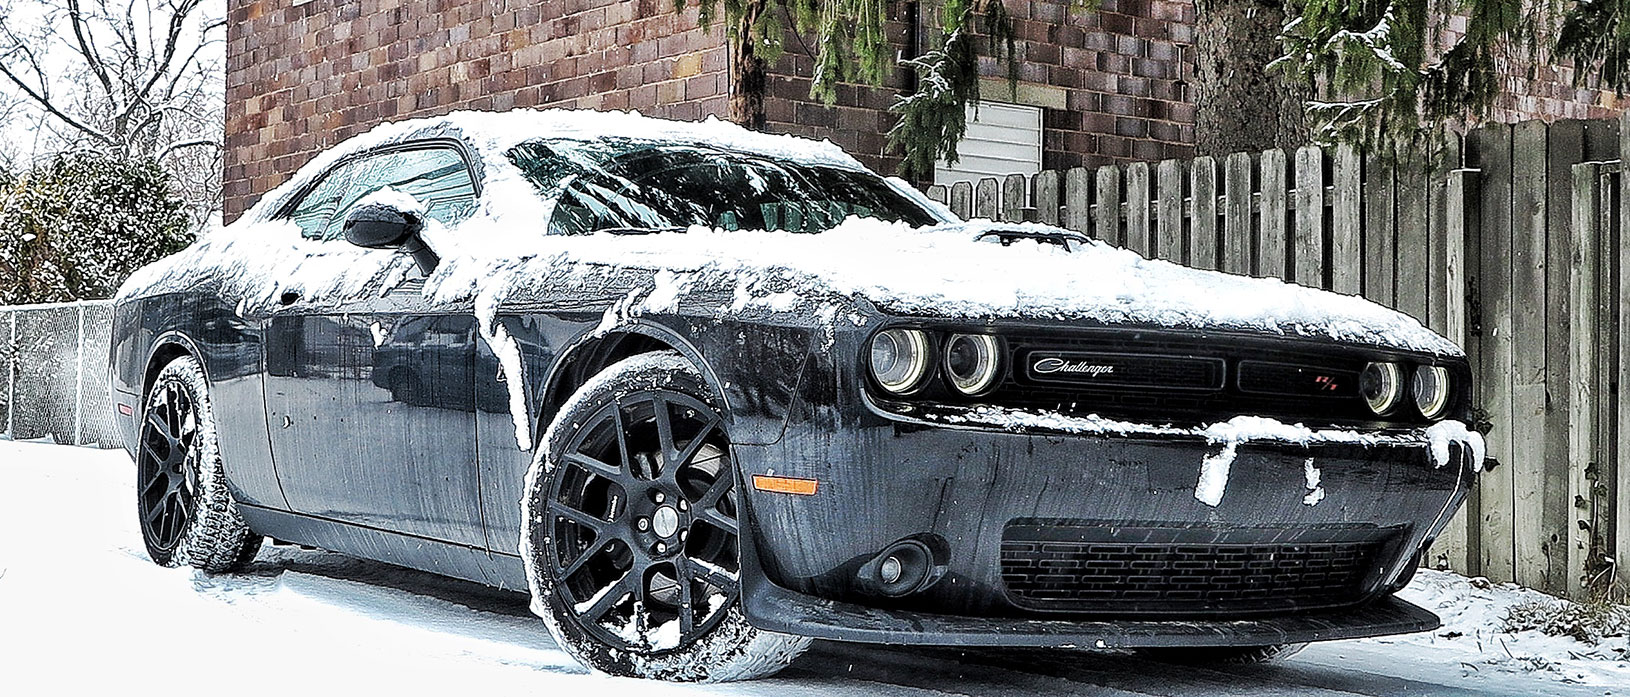 Dodge Challenger R/T snow covered